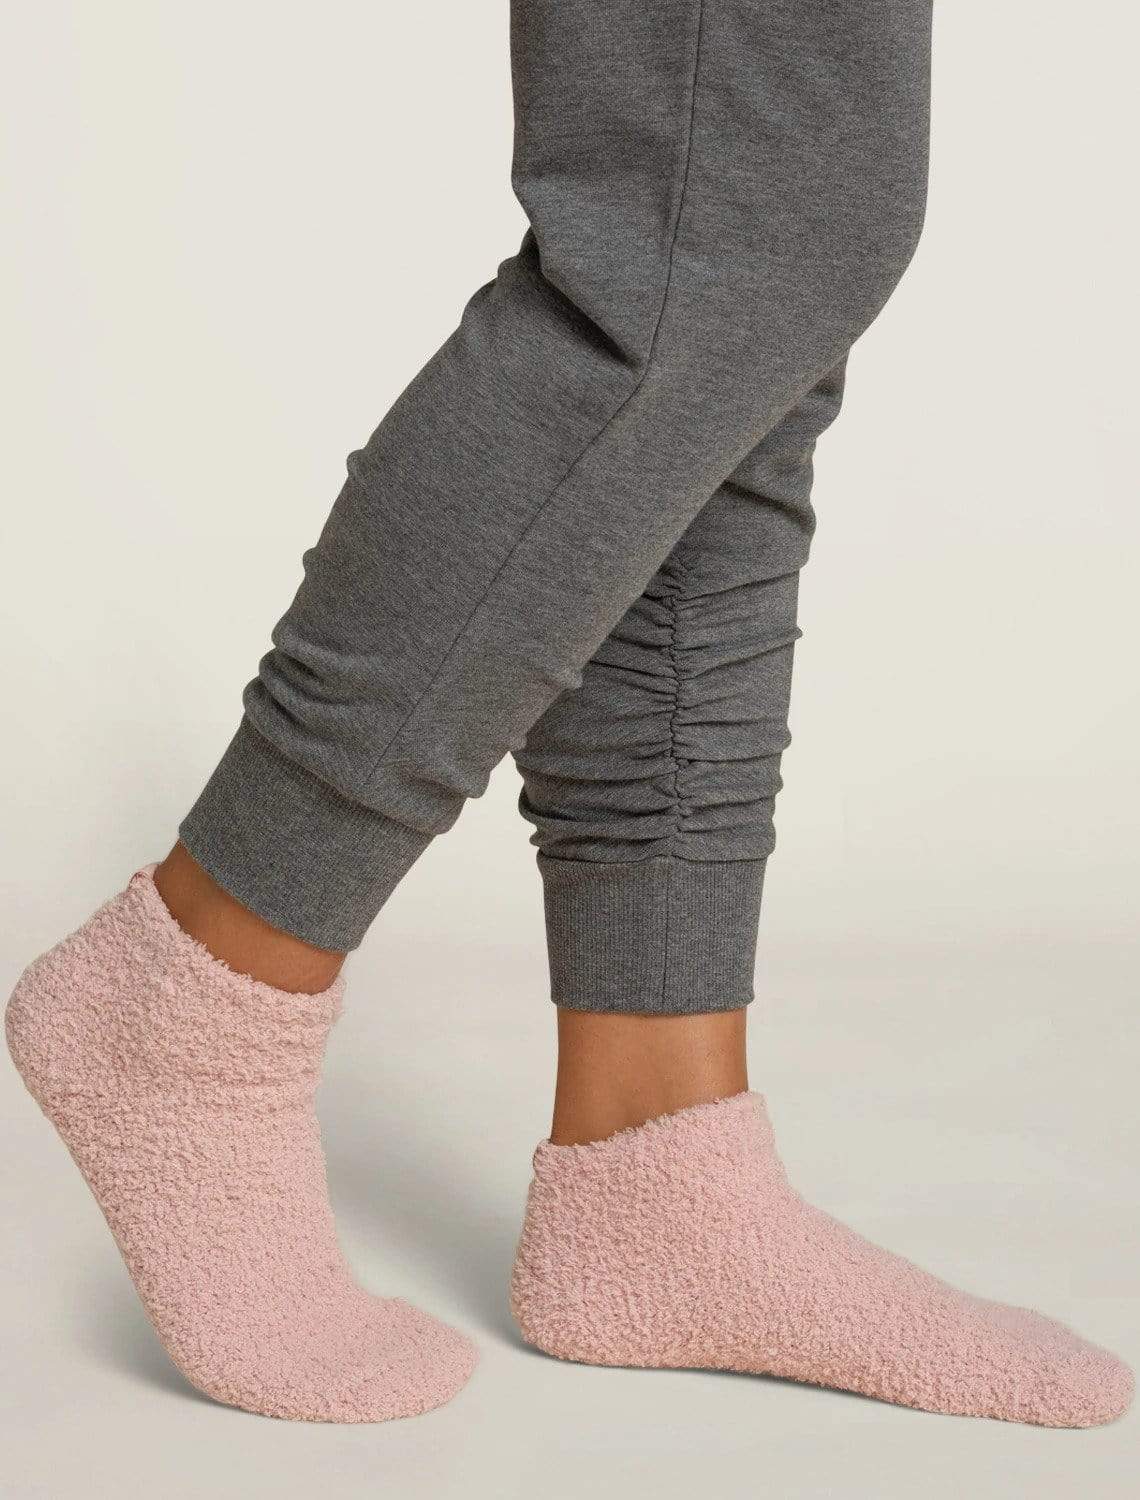 leela & lavender - The perfect go-to gift🤍 Barefoot Dreams socks! Shop now  —>> these will go fast! . .  barefoot-dreams-cozychic-in-the-wild-sock-set?_pos=7&_sid=538046f9b&_ss=r